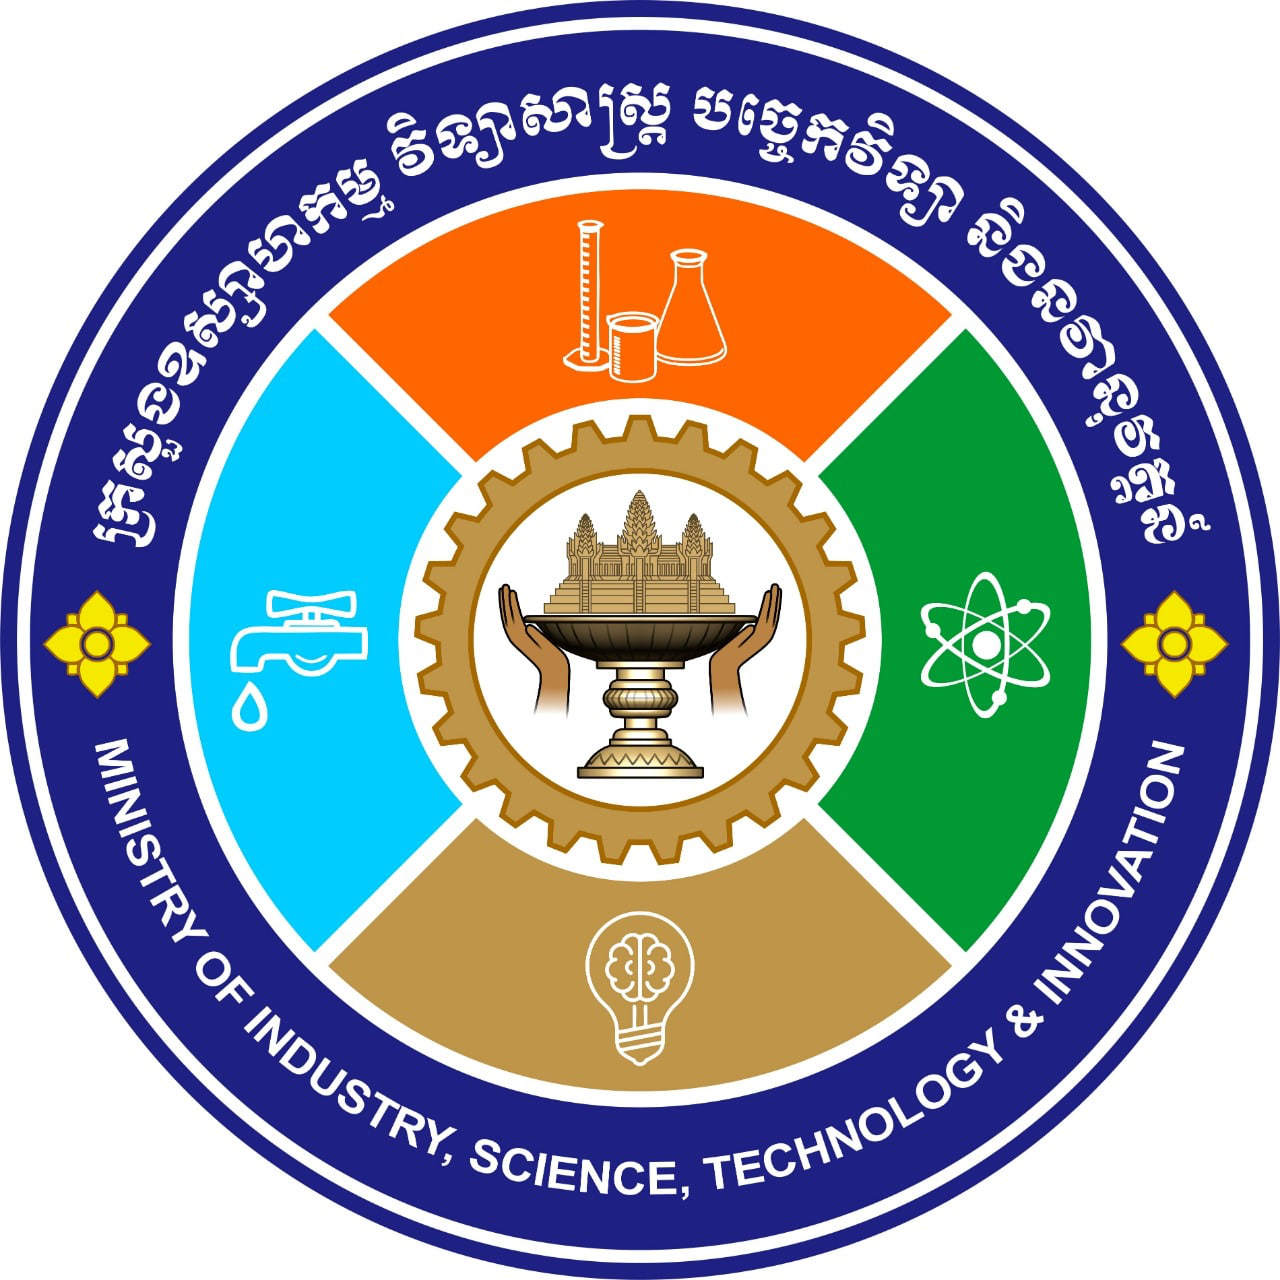 Ministry of Industry, Science, Technology and Innovation